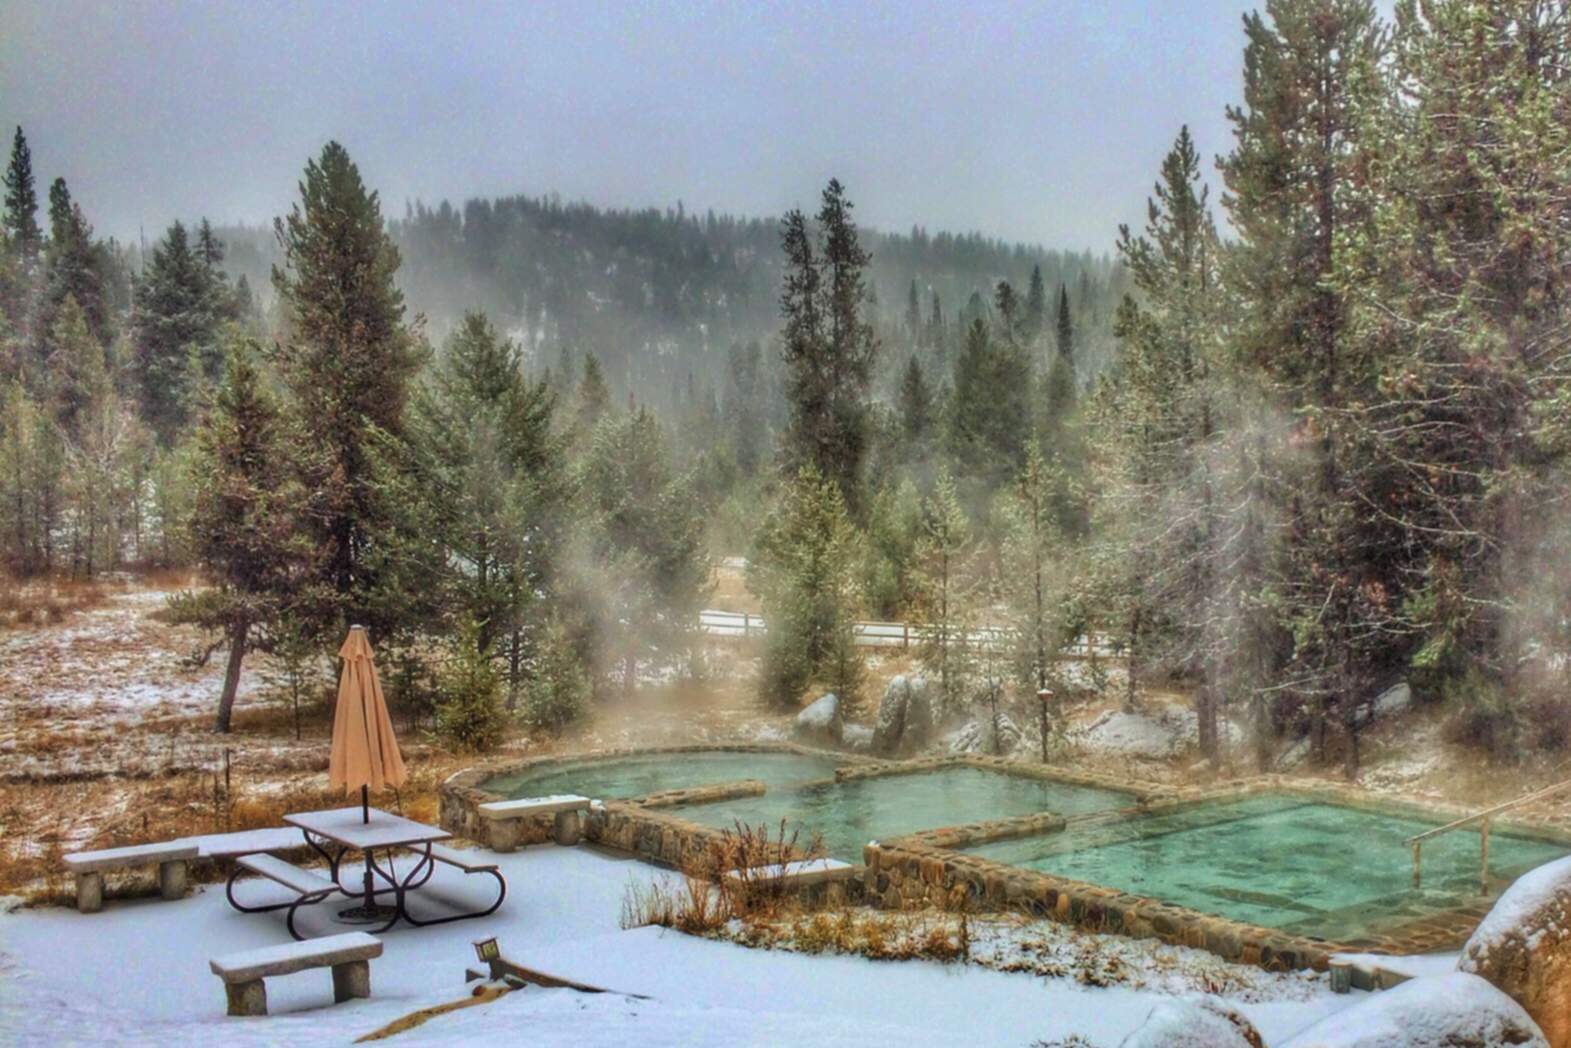 7 Hot Springs to Soak Your Troubles Away.